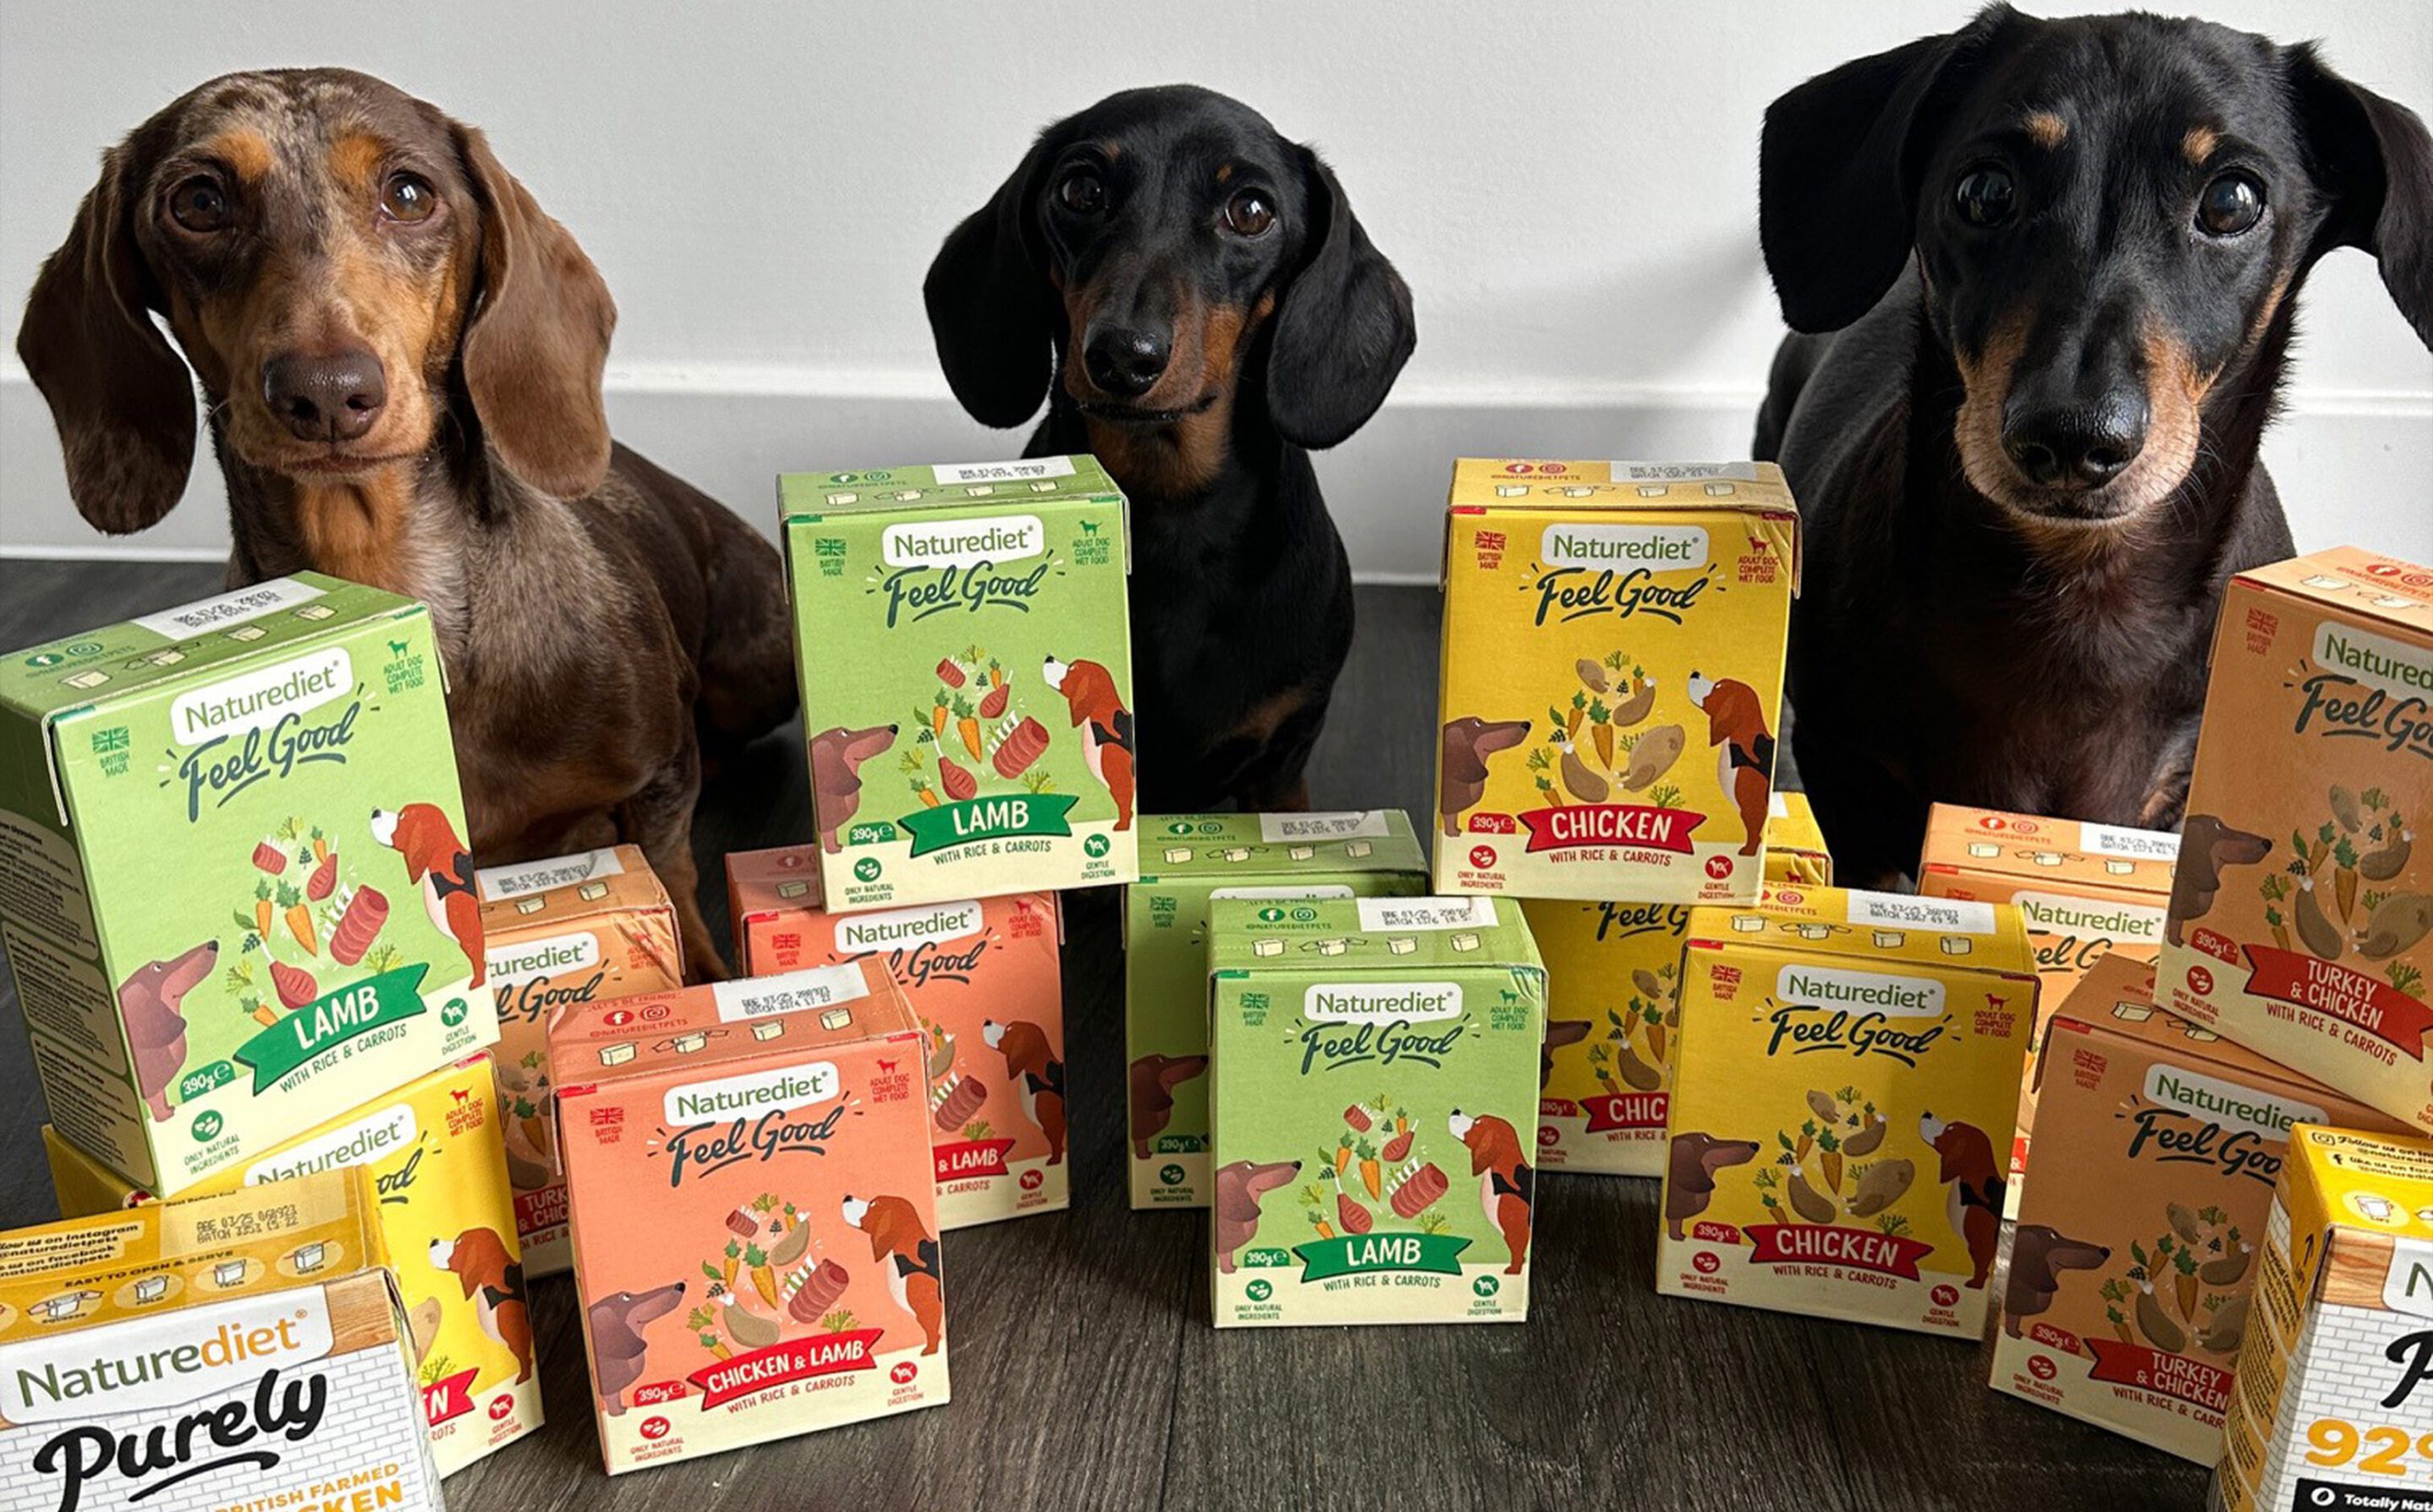 3 dachshunds with Naturediet products